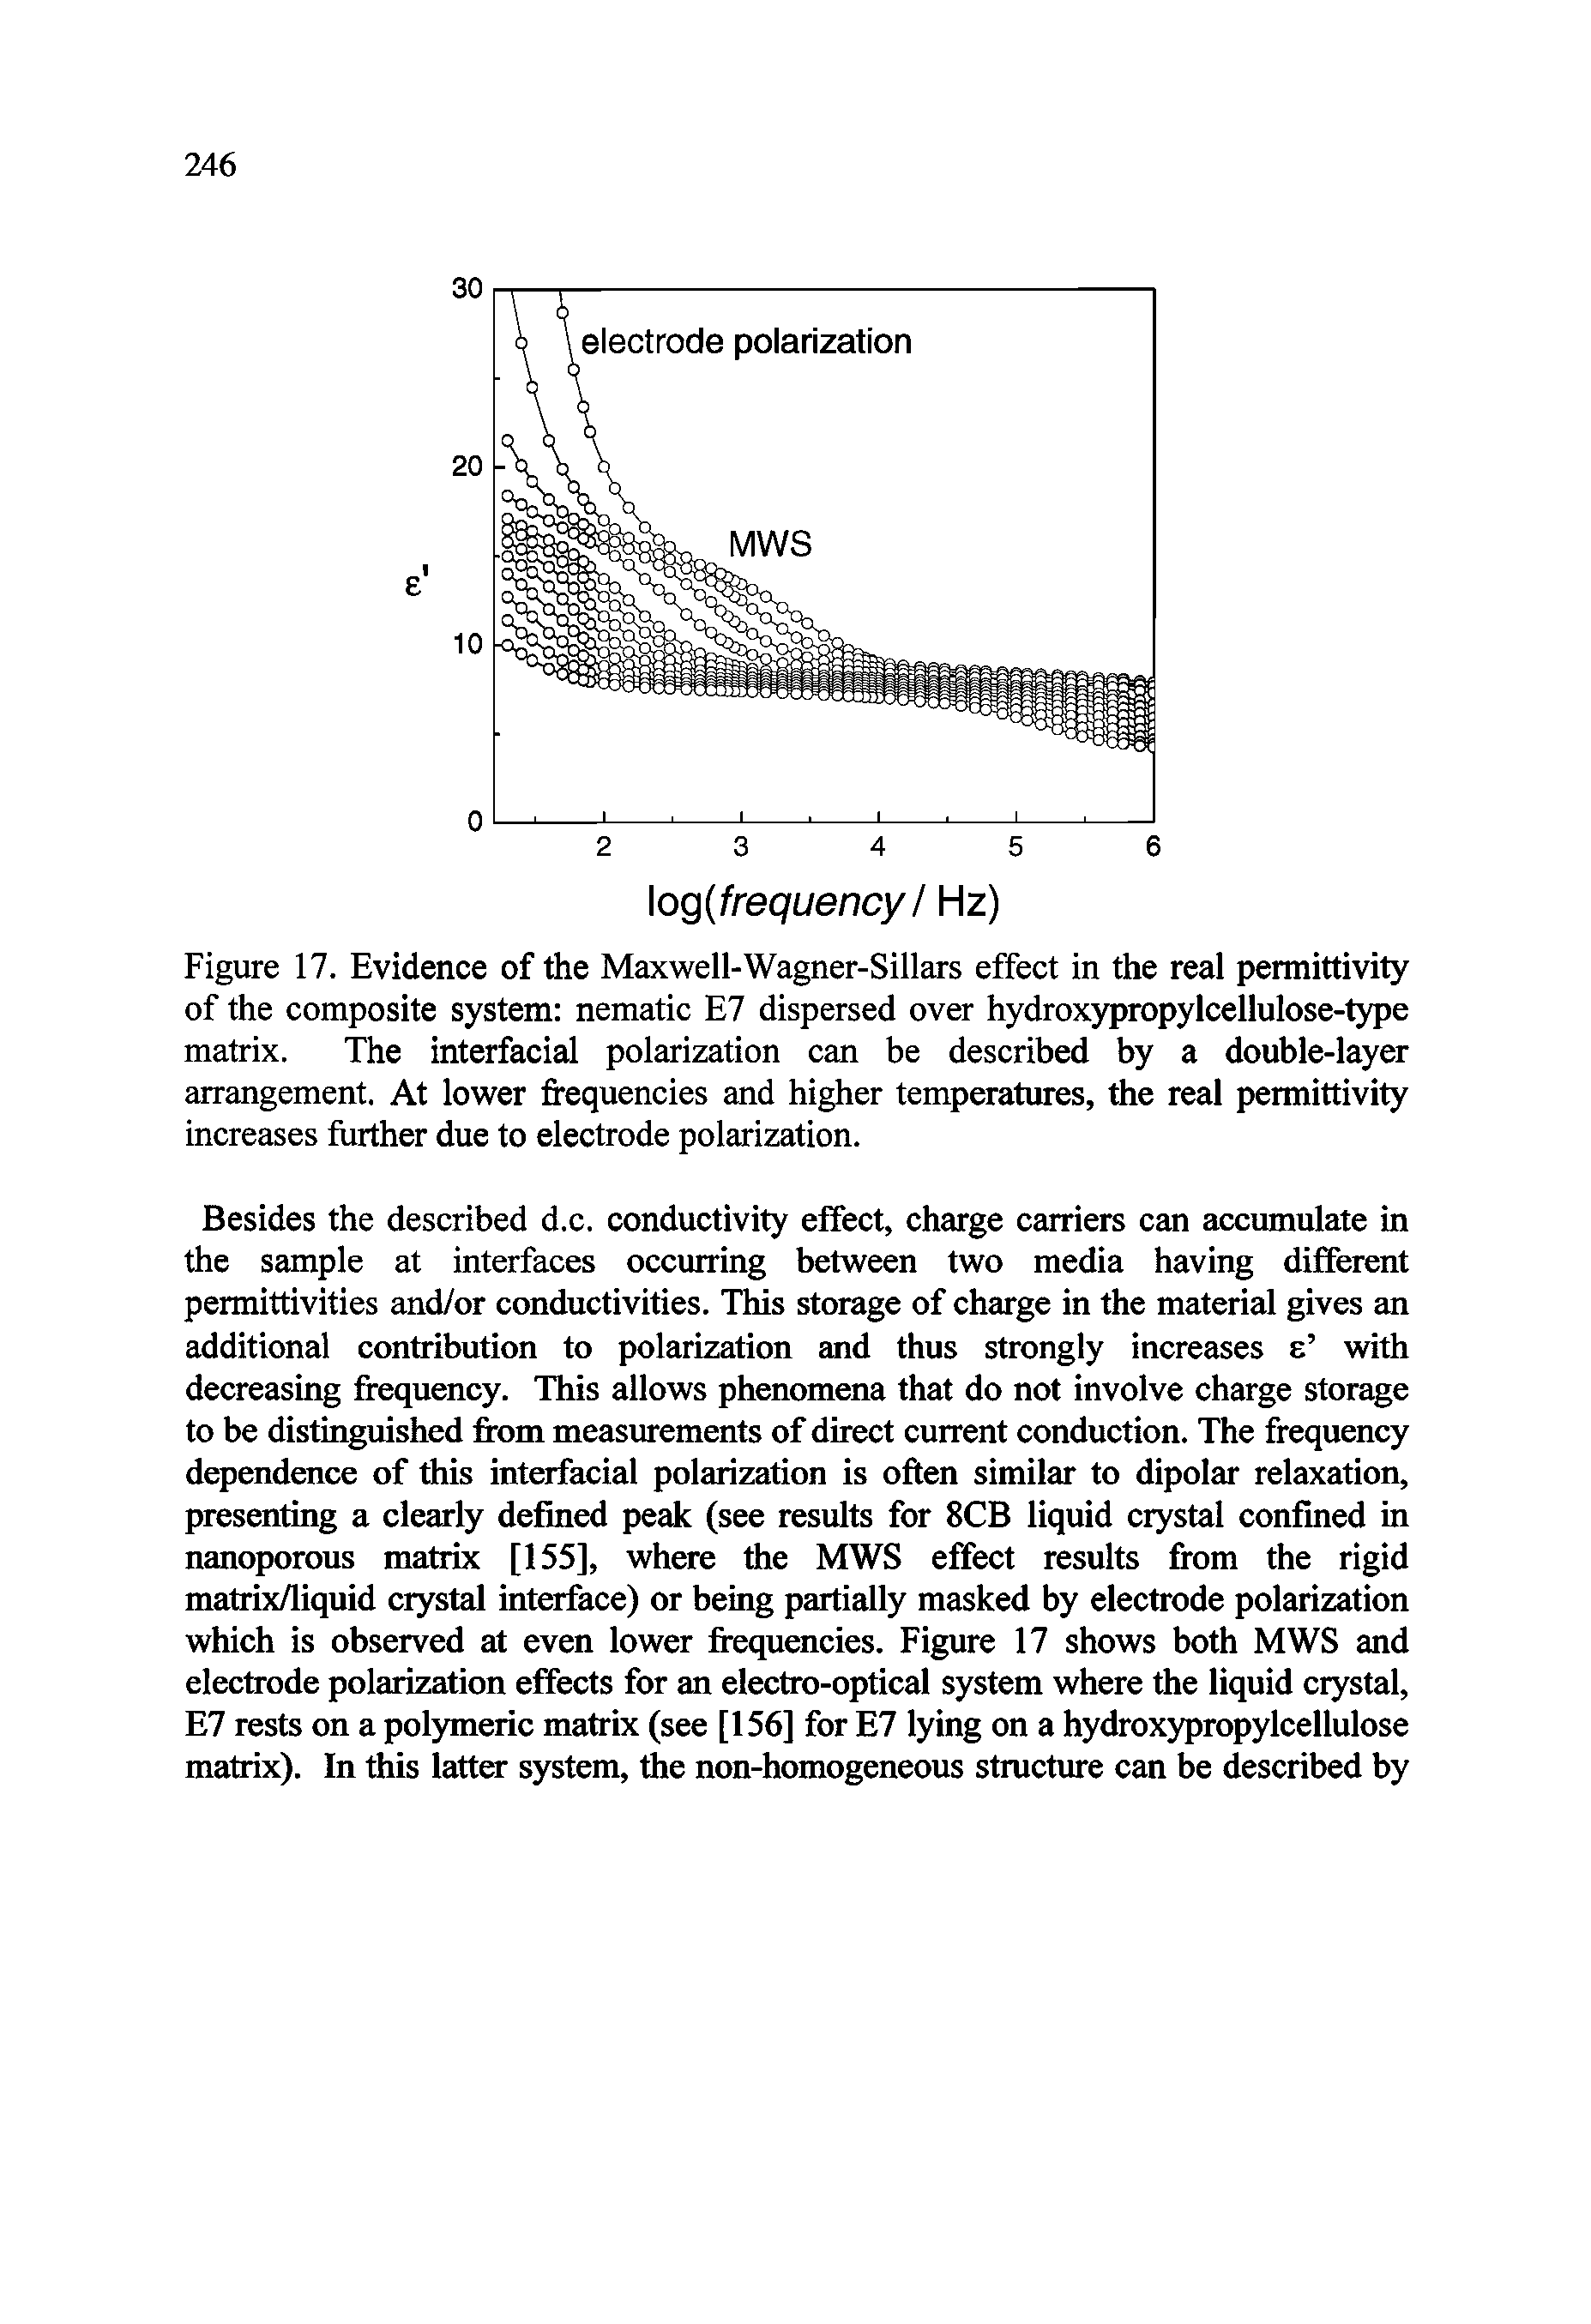 Figure 17. Evidence of the Maxwell-Wagner-Sillars effect in the real permittivity of the composite system nematic E7 dispersed over hydroxypropylcellulose-type matrix. The interfacial polarization can be described by a double-layer arrangement. At lower frequencies and higher temperatures, the real permittivity increases further due to electrode polarization.